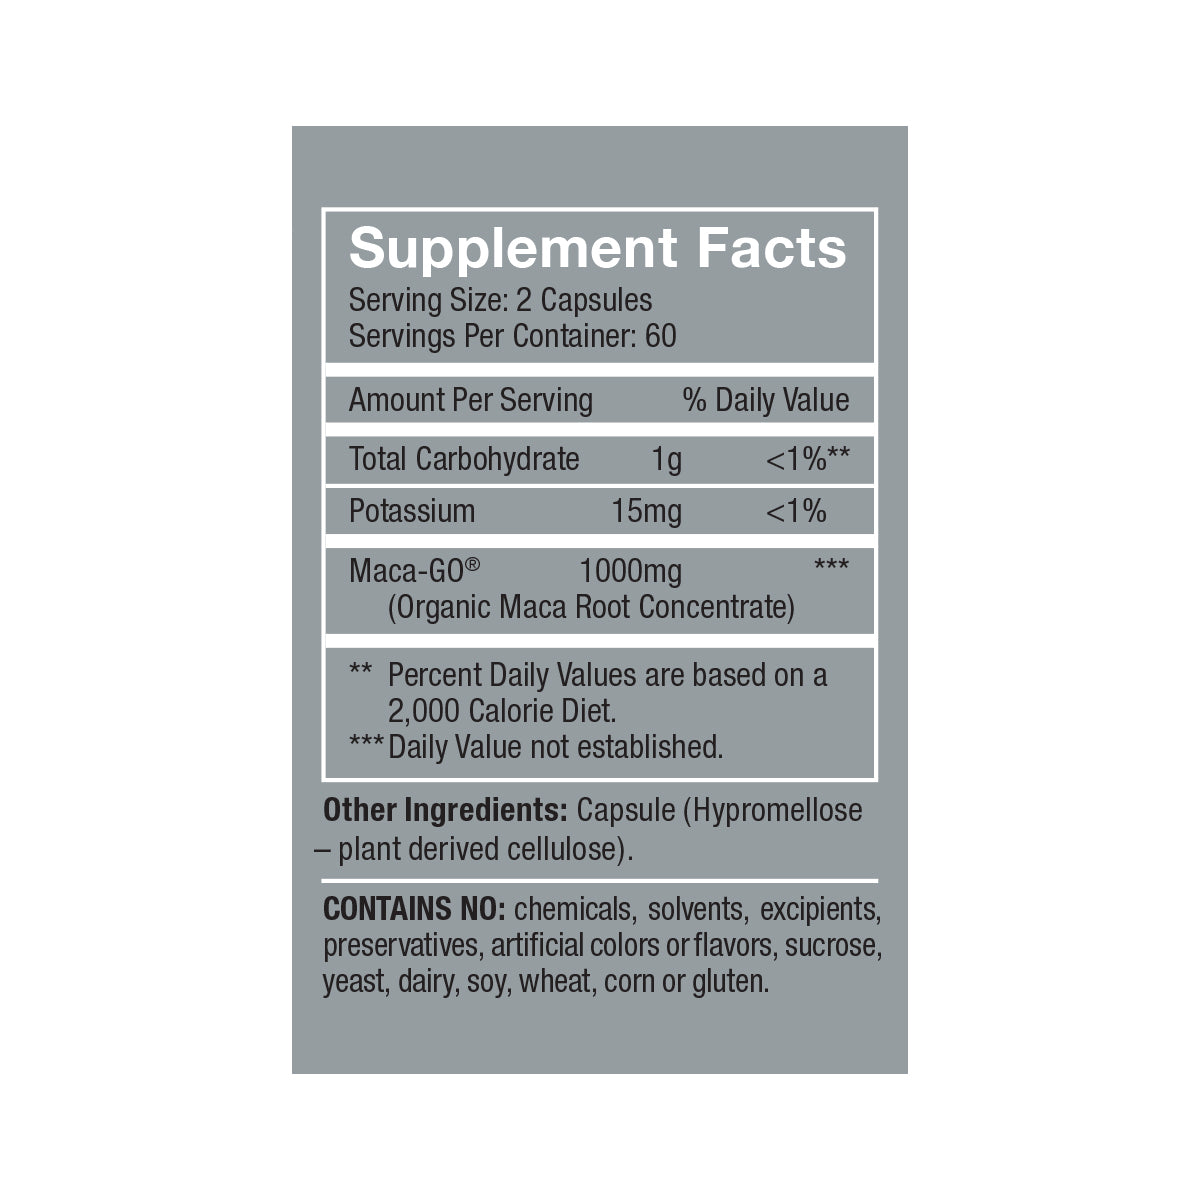 Femmenessence MacaPause <br>For Post Menopause Supplement Facts: Serving Size: 2 capsules, Servings per container: 60, Amount Per Serving % daily value, Total Carbohydrate 1g <1%**, Potassium 15mg <1%, Maca-GO® (Organic Root Concentrate) 1000mg ***, other ingredient: capsule (hypromellose—plant derived cellulose), contains no chemicals, solvesnts, excipients, preservatives, artificial colors or flavors, sucrose, yeast, dairy, soy, wheat, corn, or gluten